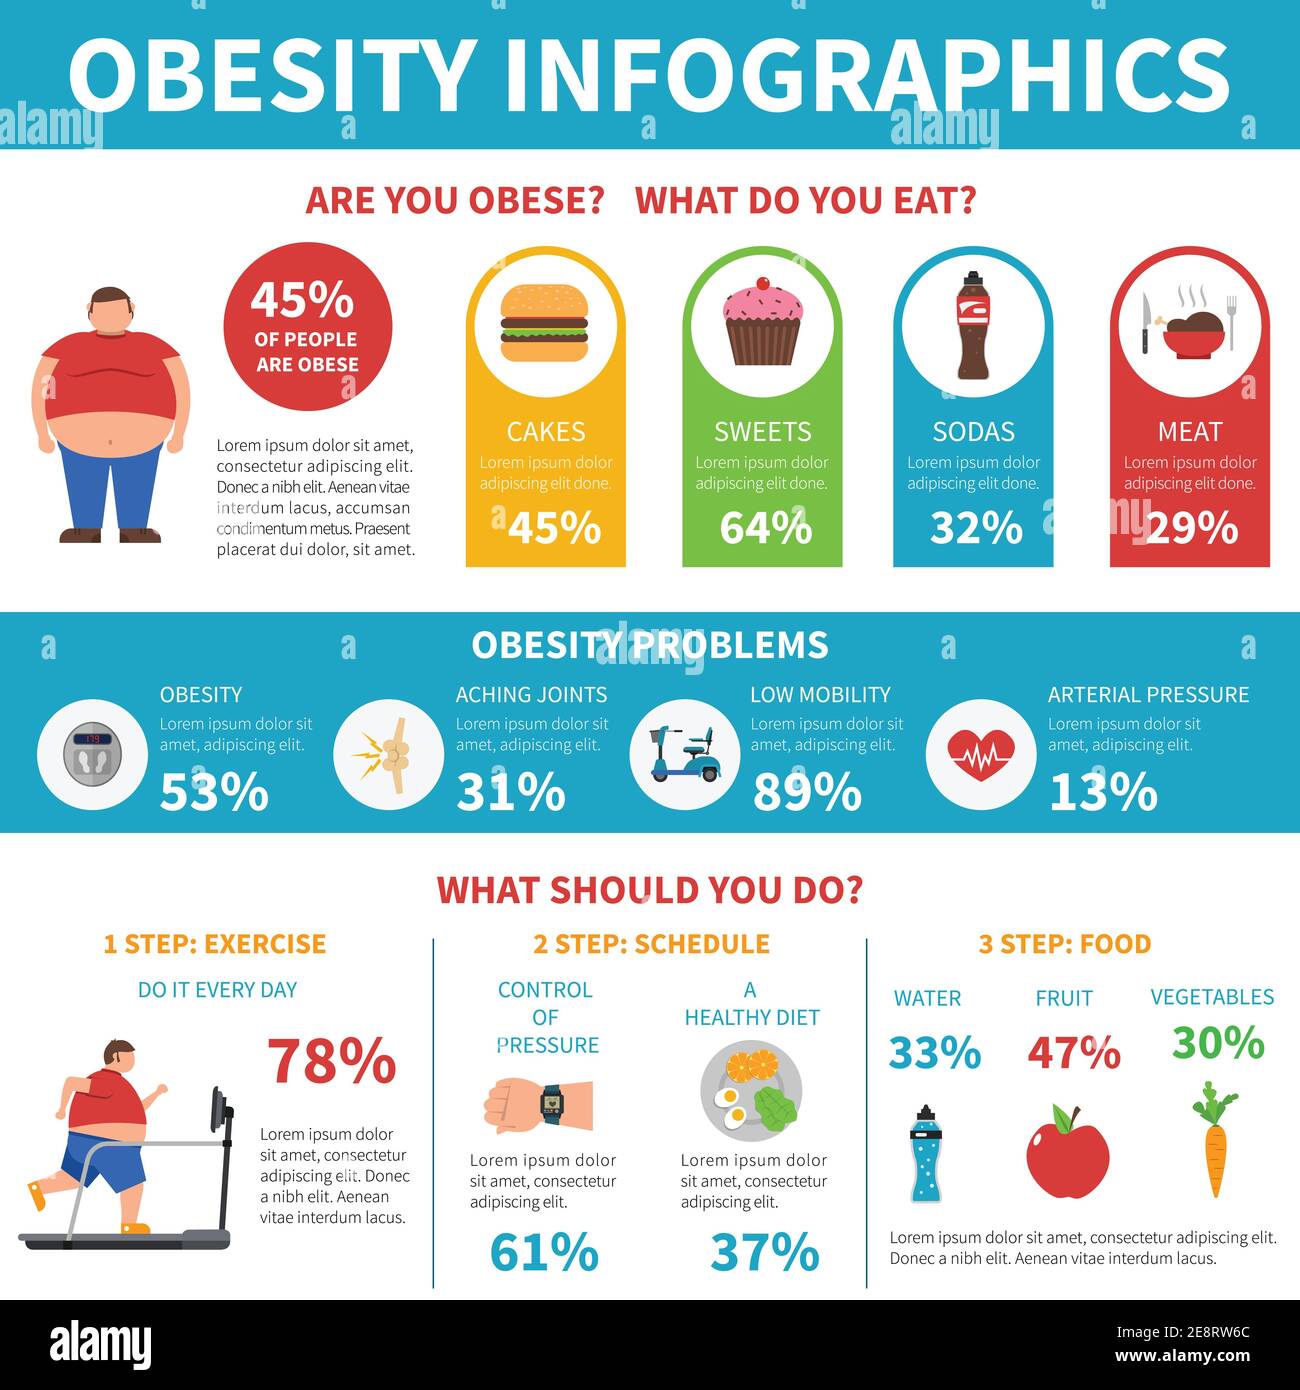 Obesity Information And Practical Steps In Problems Solution Infographic Healthy Life Promoting